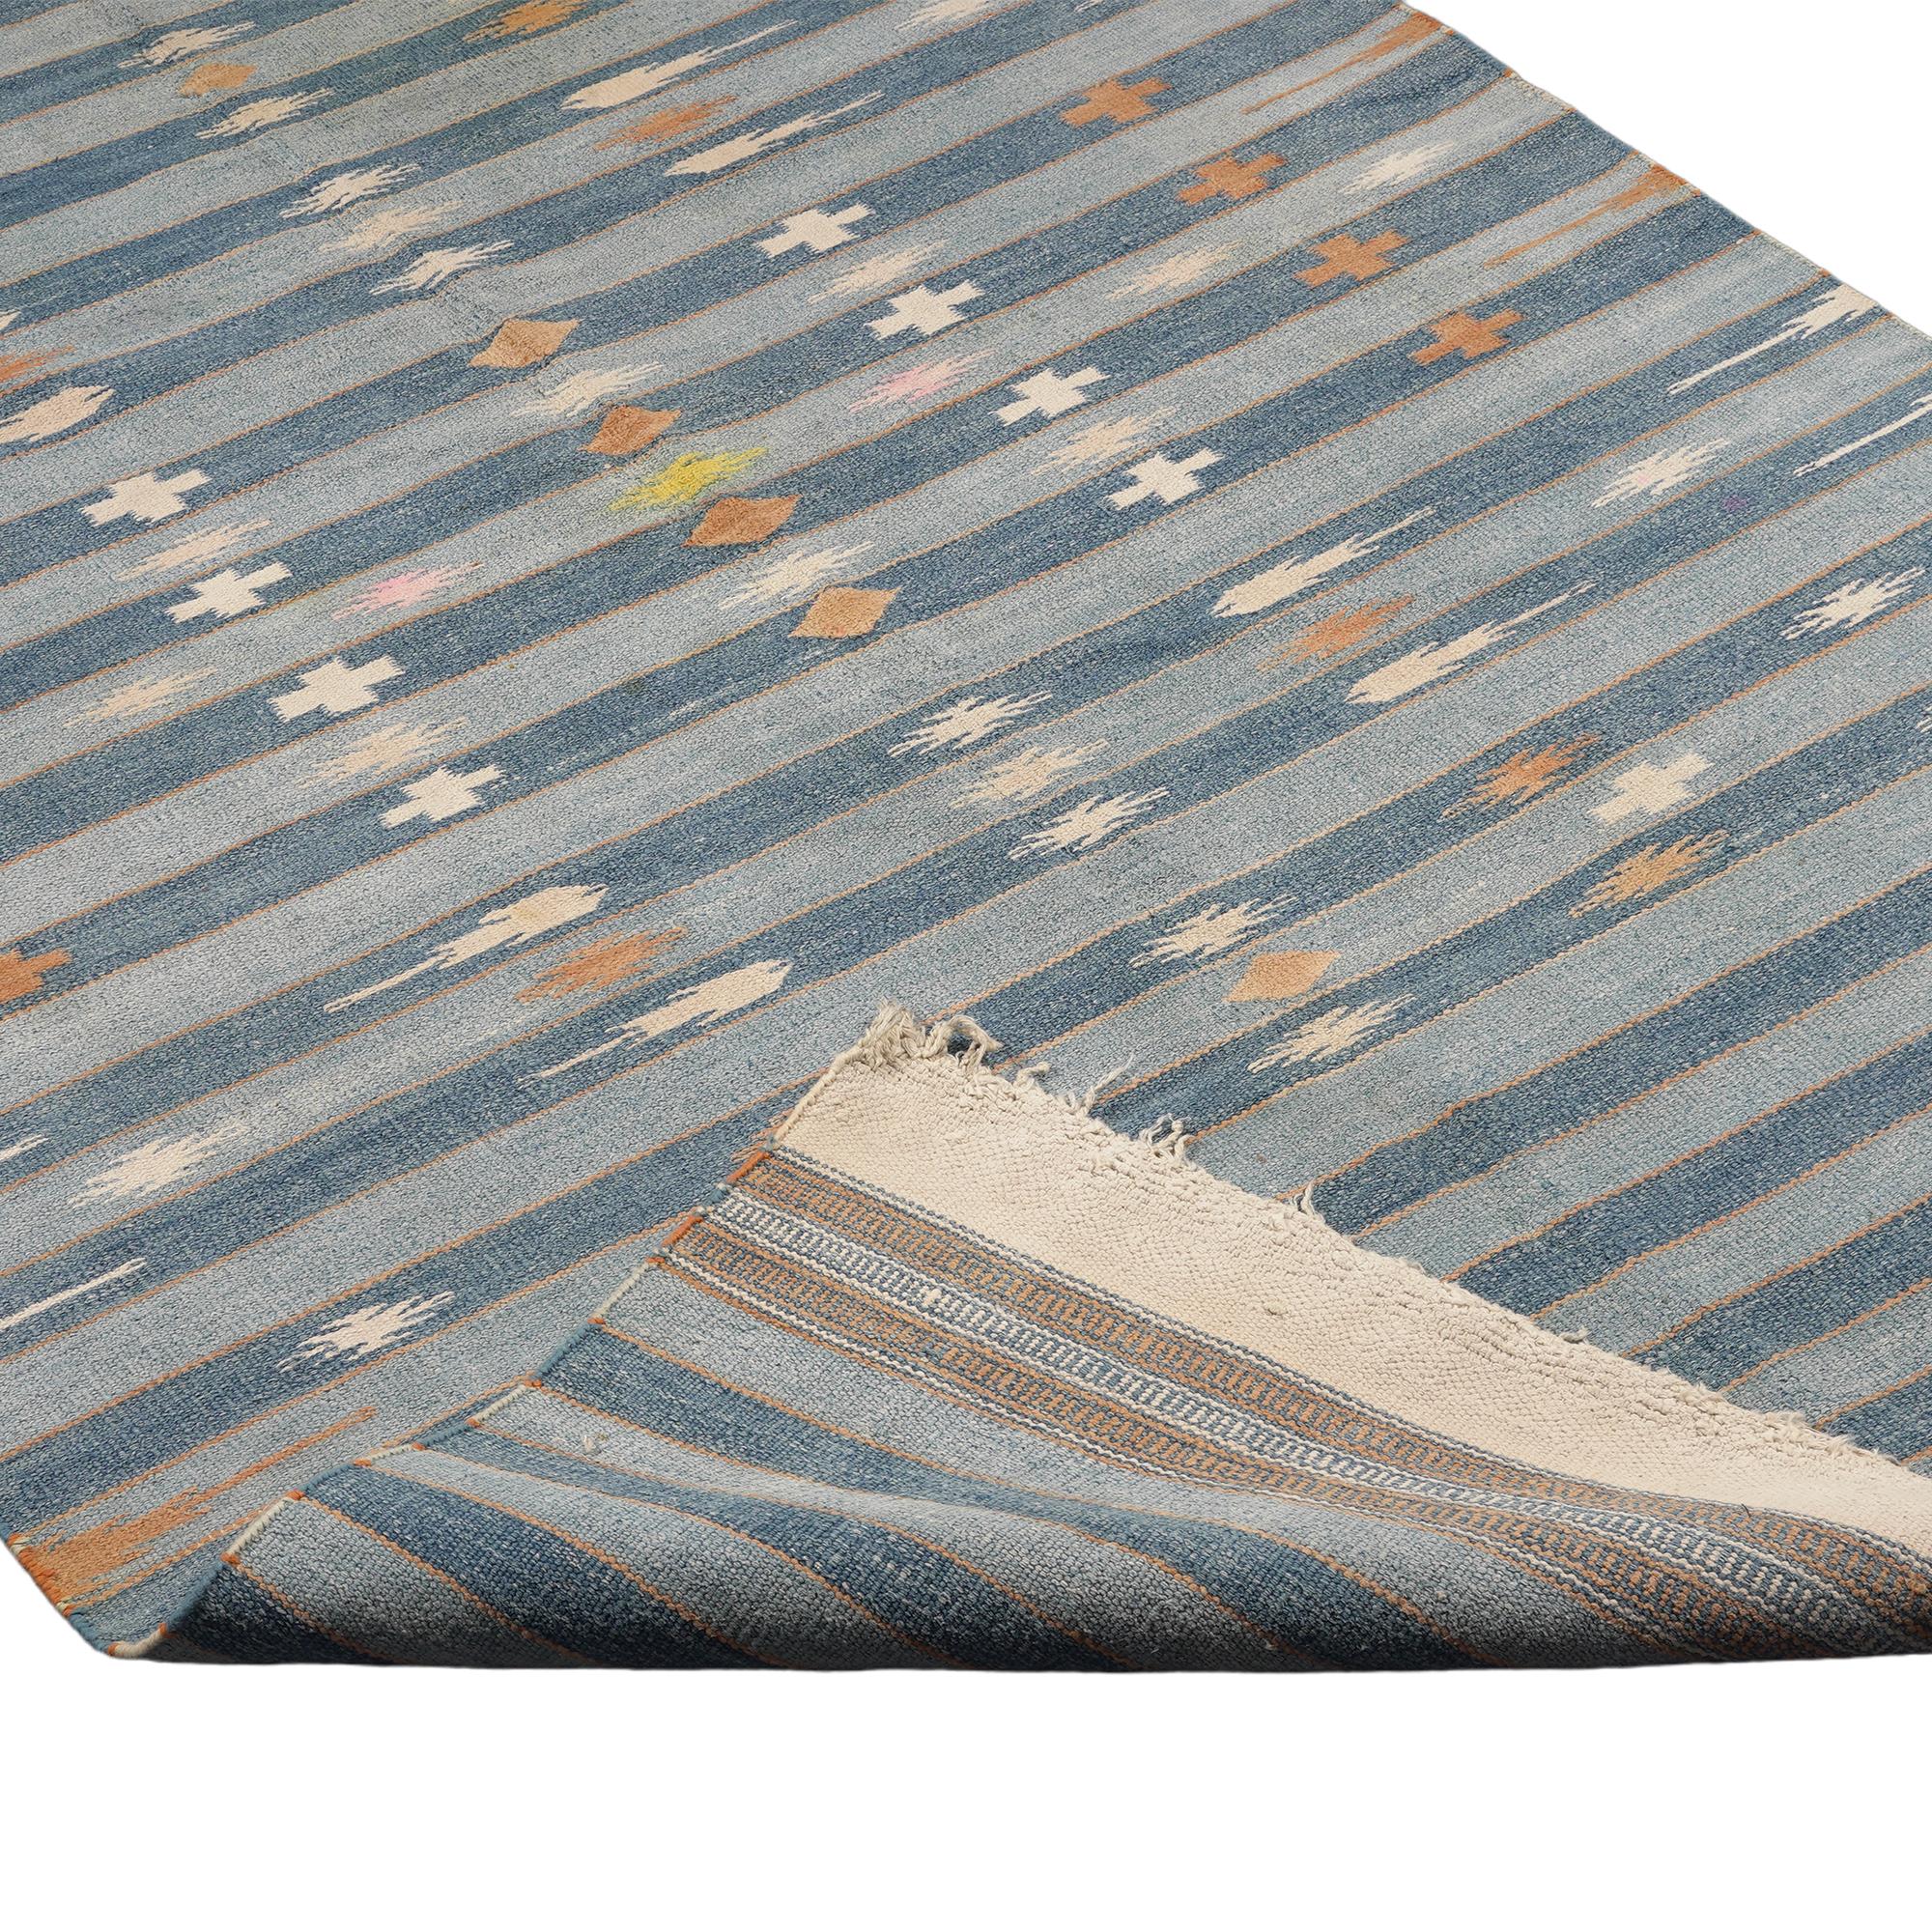 Vintage Dhurrie Rug with Blue Stripes and Geometric Patterns, from Rug & Kilim In Good Condition For Sale In Long Island City, NY